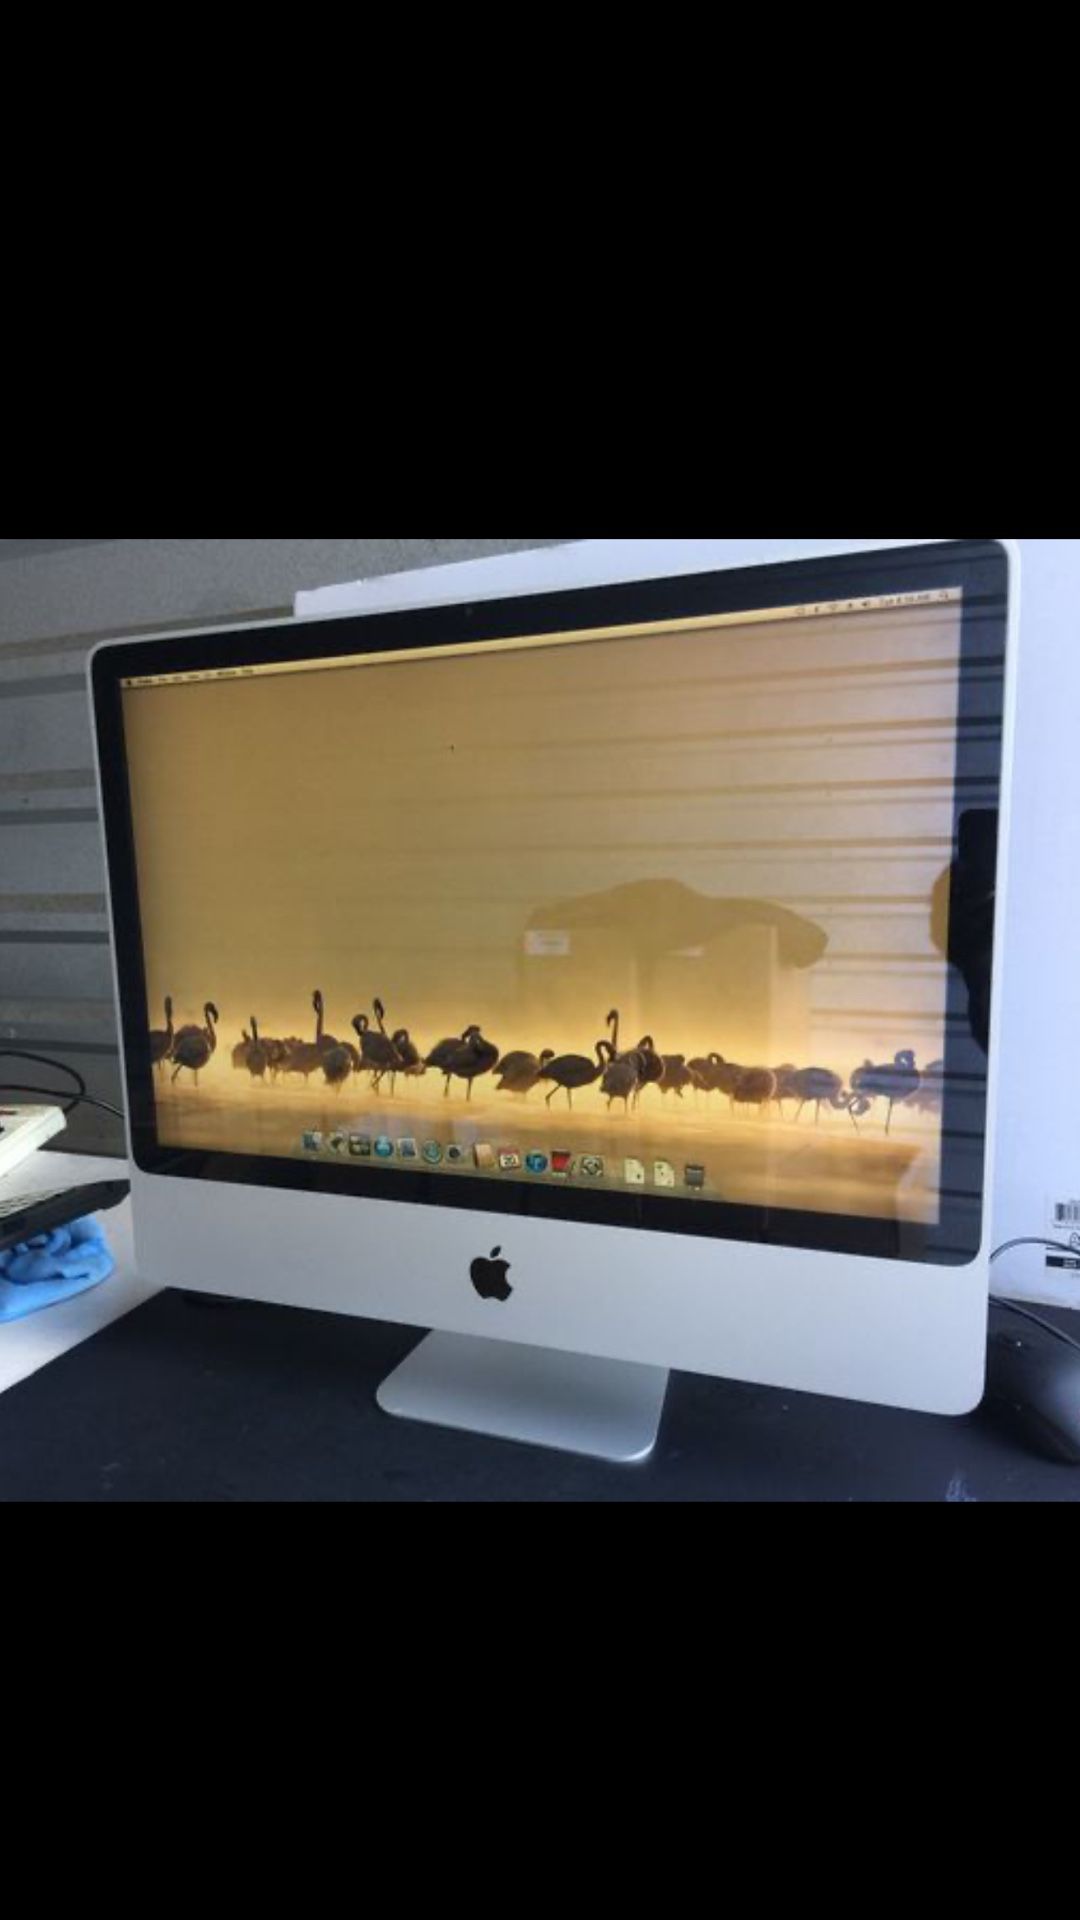 24” large screen All in one Apple iMac with black mouse and keyboard Mouse and keyboard the black one in the last picture It’s in excellent w